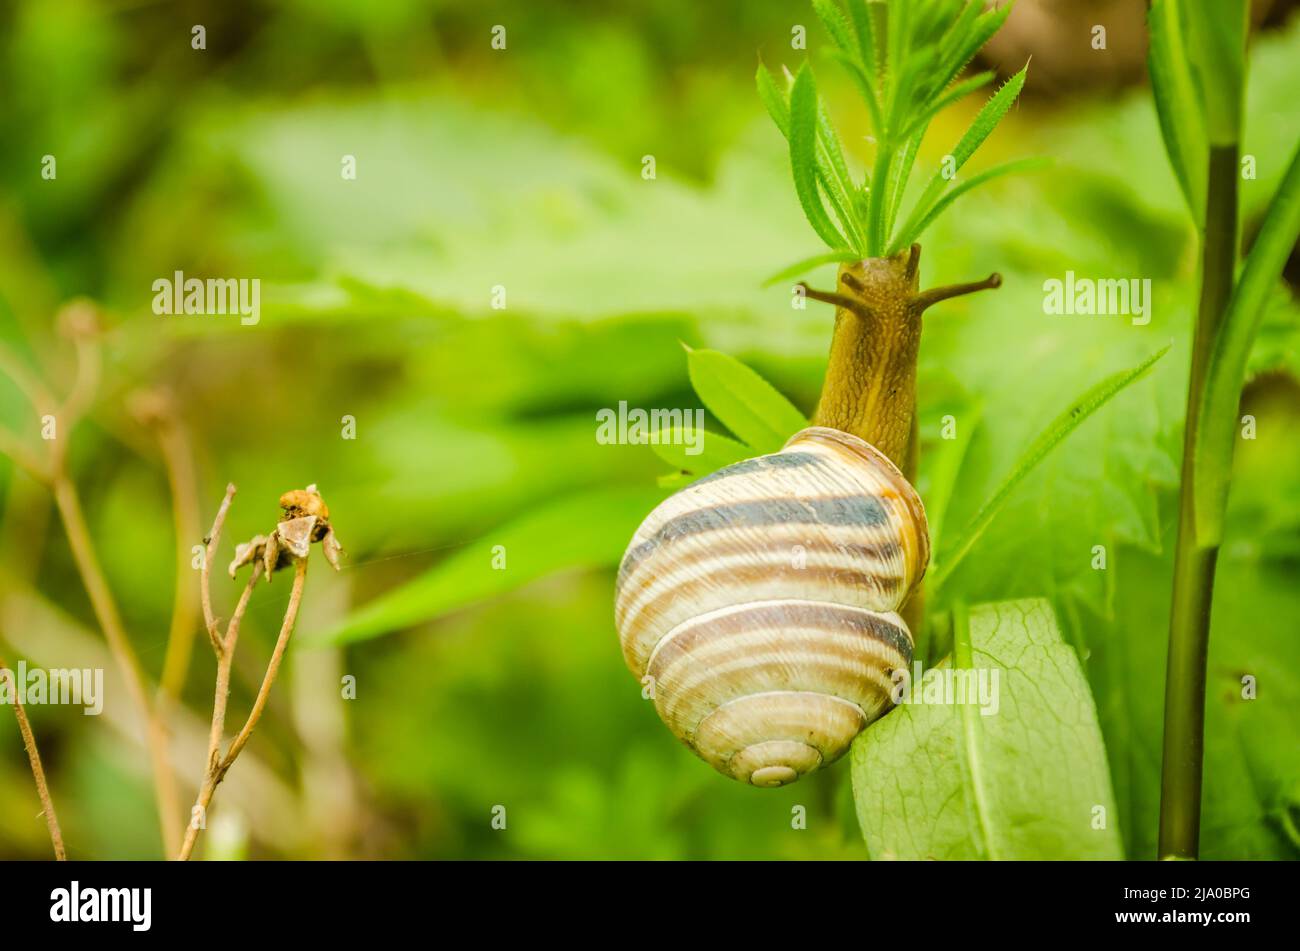 A young field snail on a stalk of grass in a green forest illuminated by the sun. Stock Photo